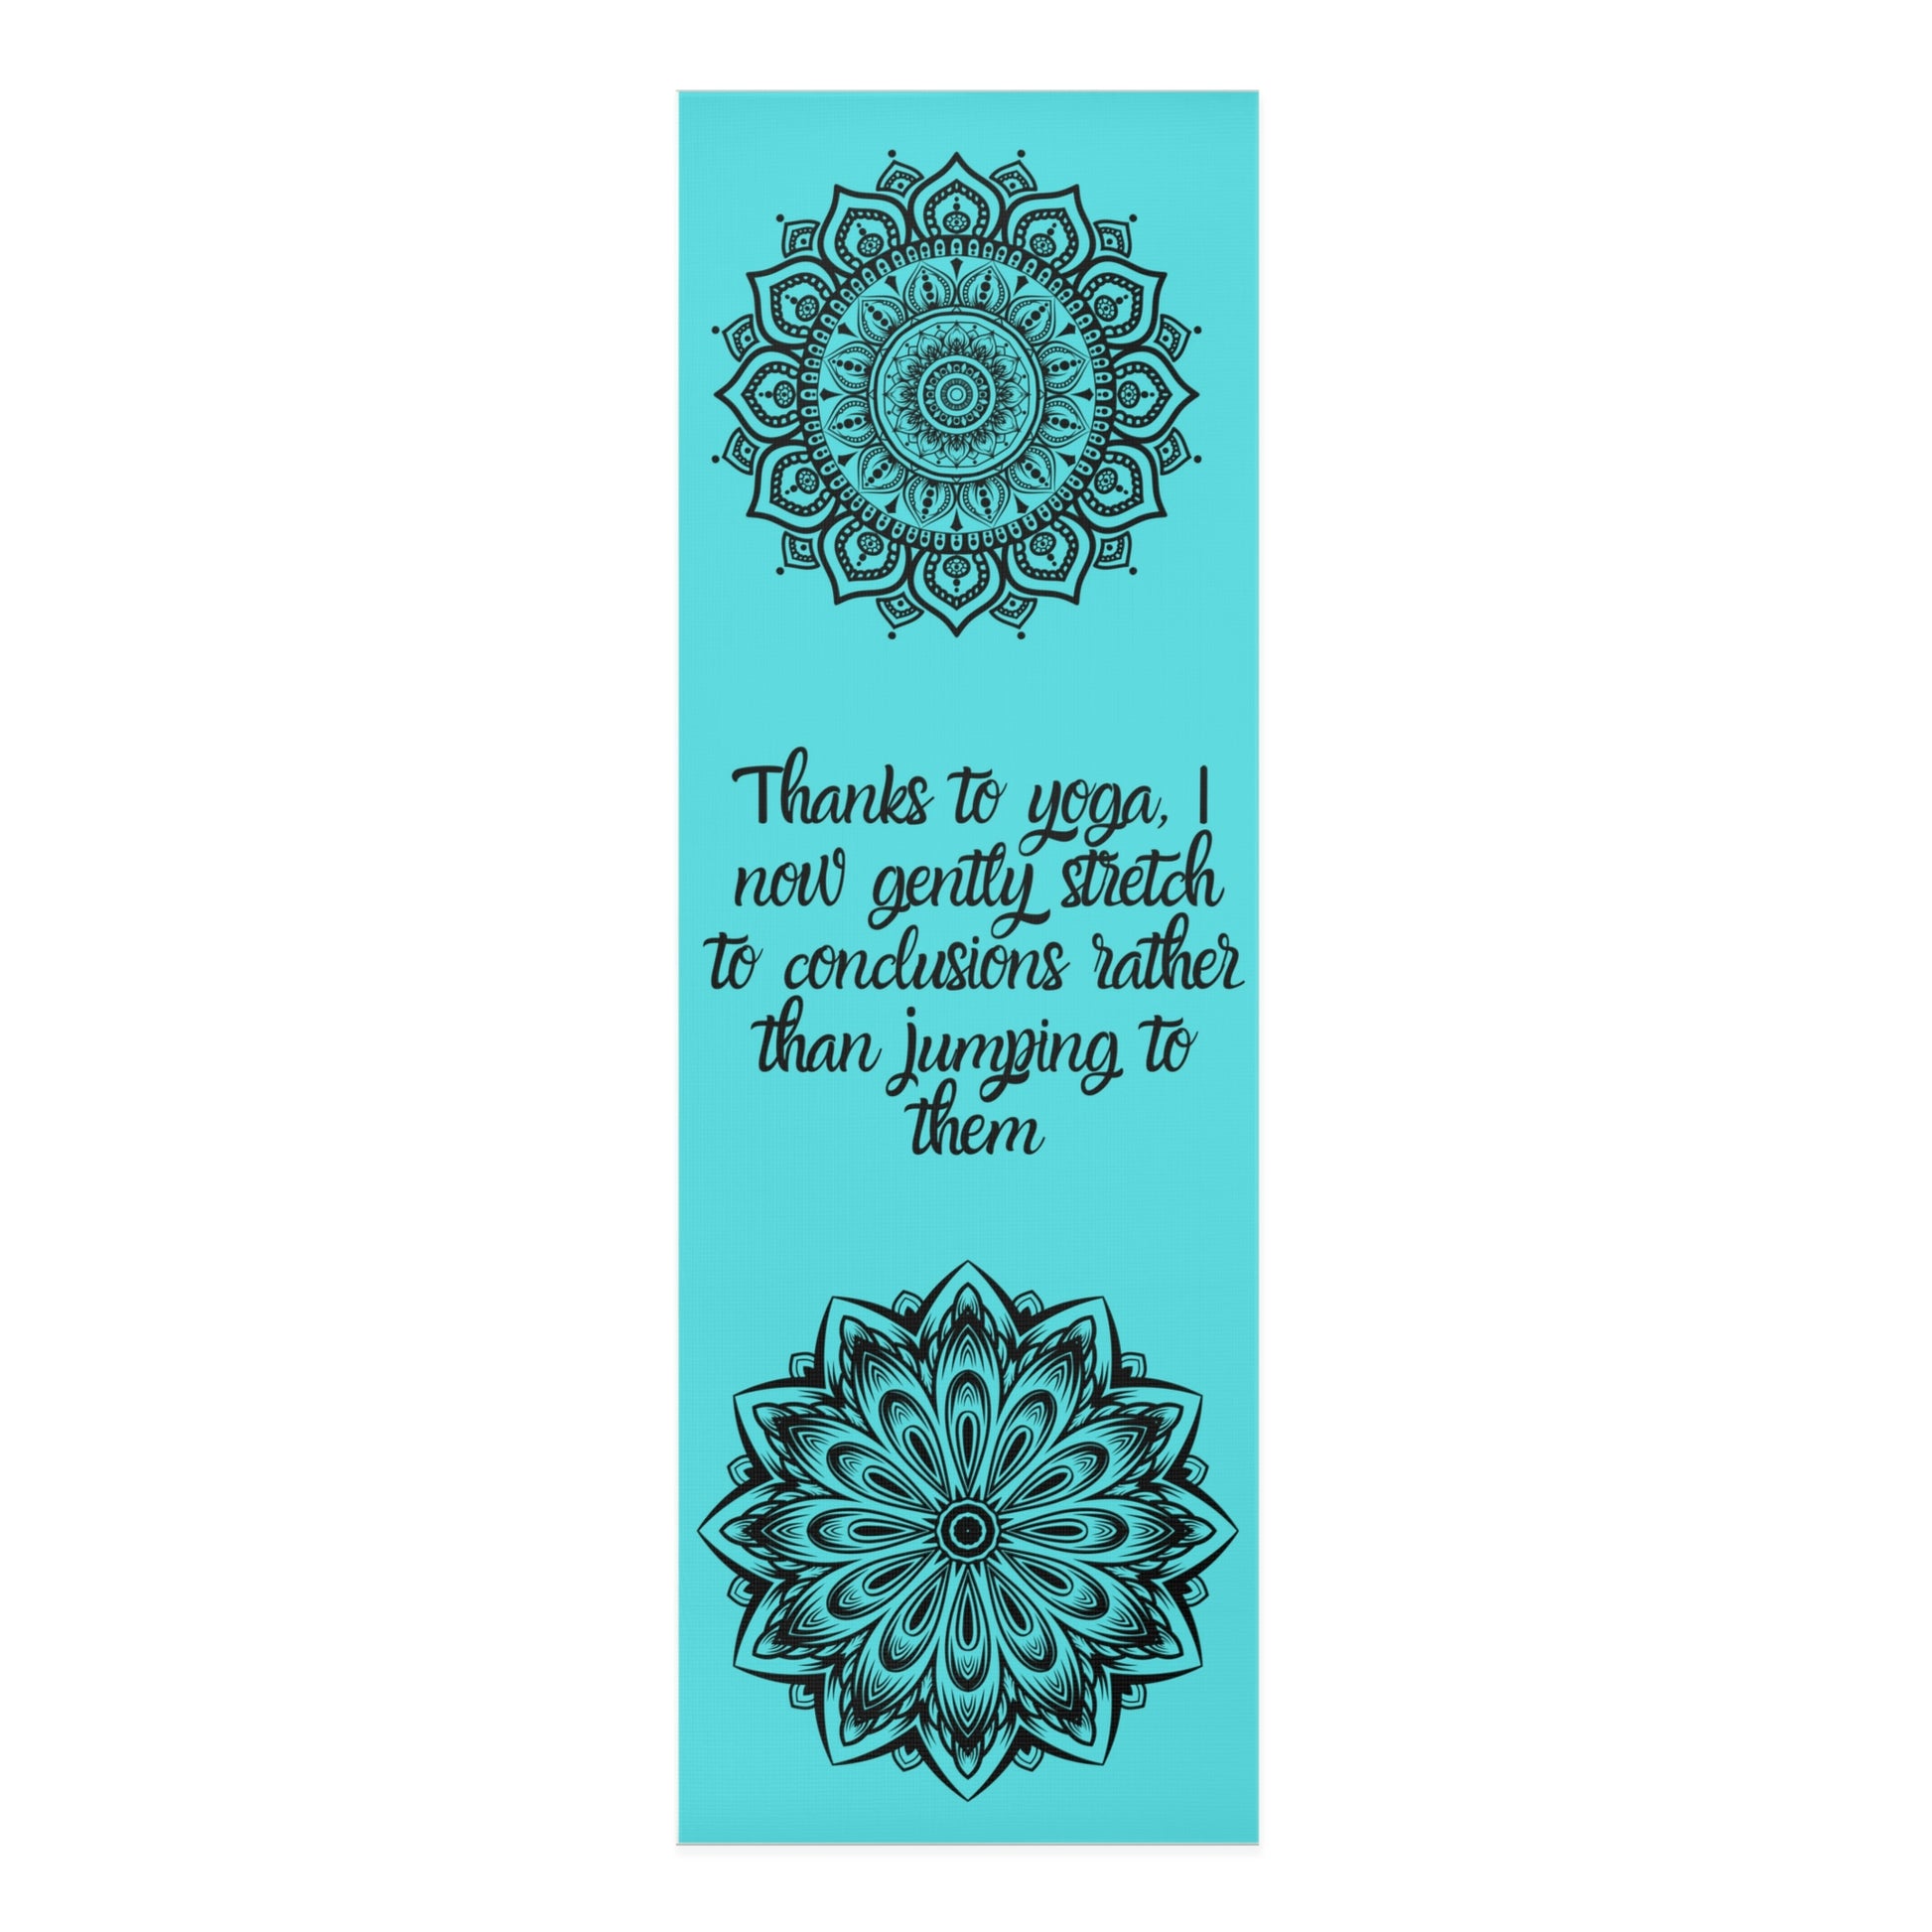 Stretch to Conclusions Foam Yoga Mat, Namaste, Funny Yoga Mat